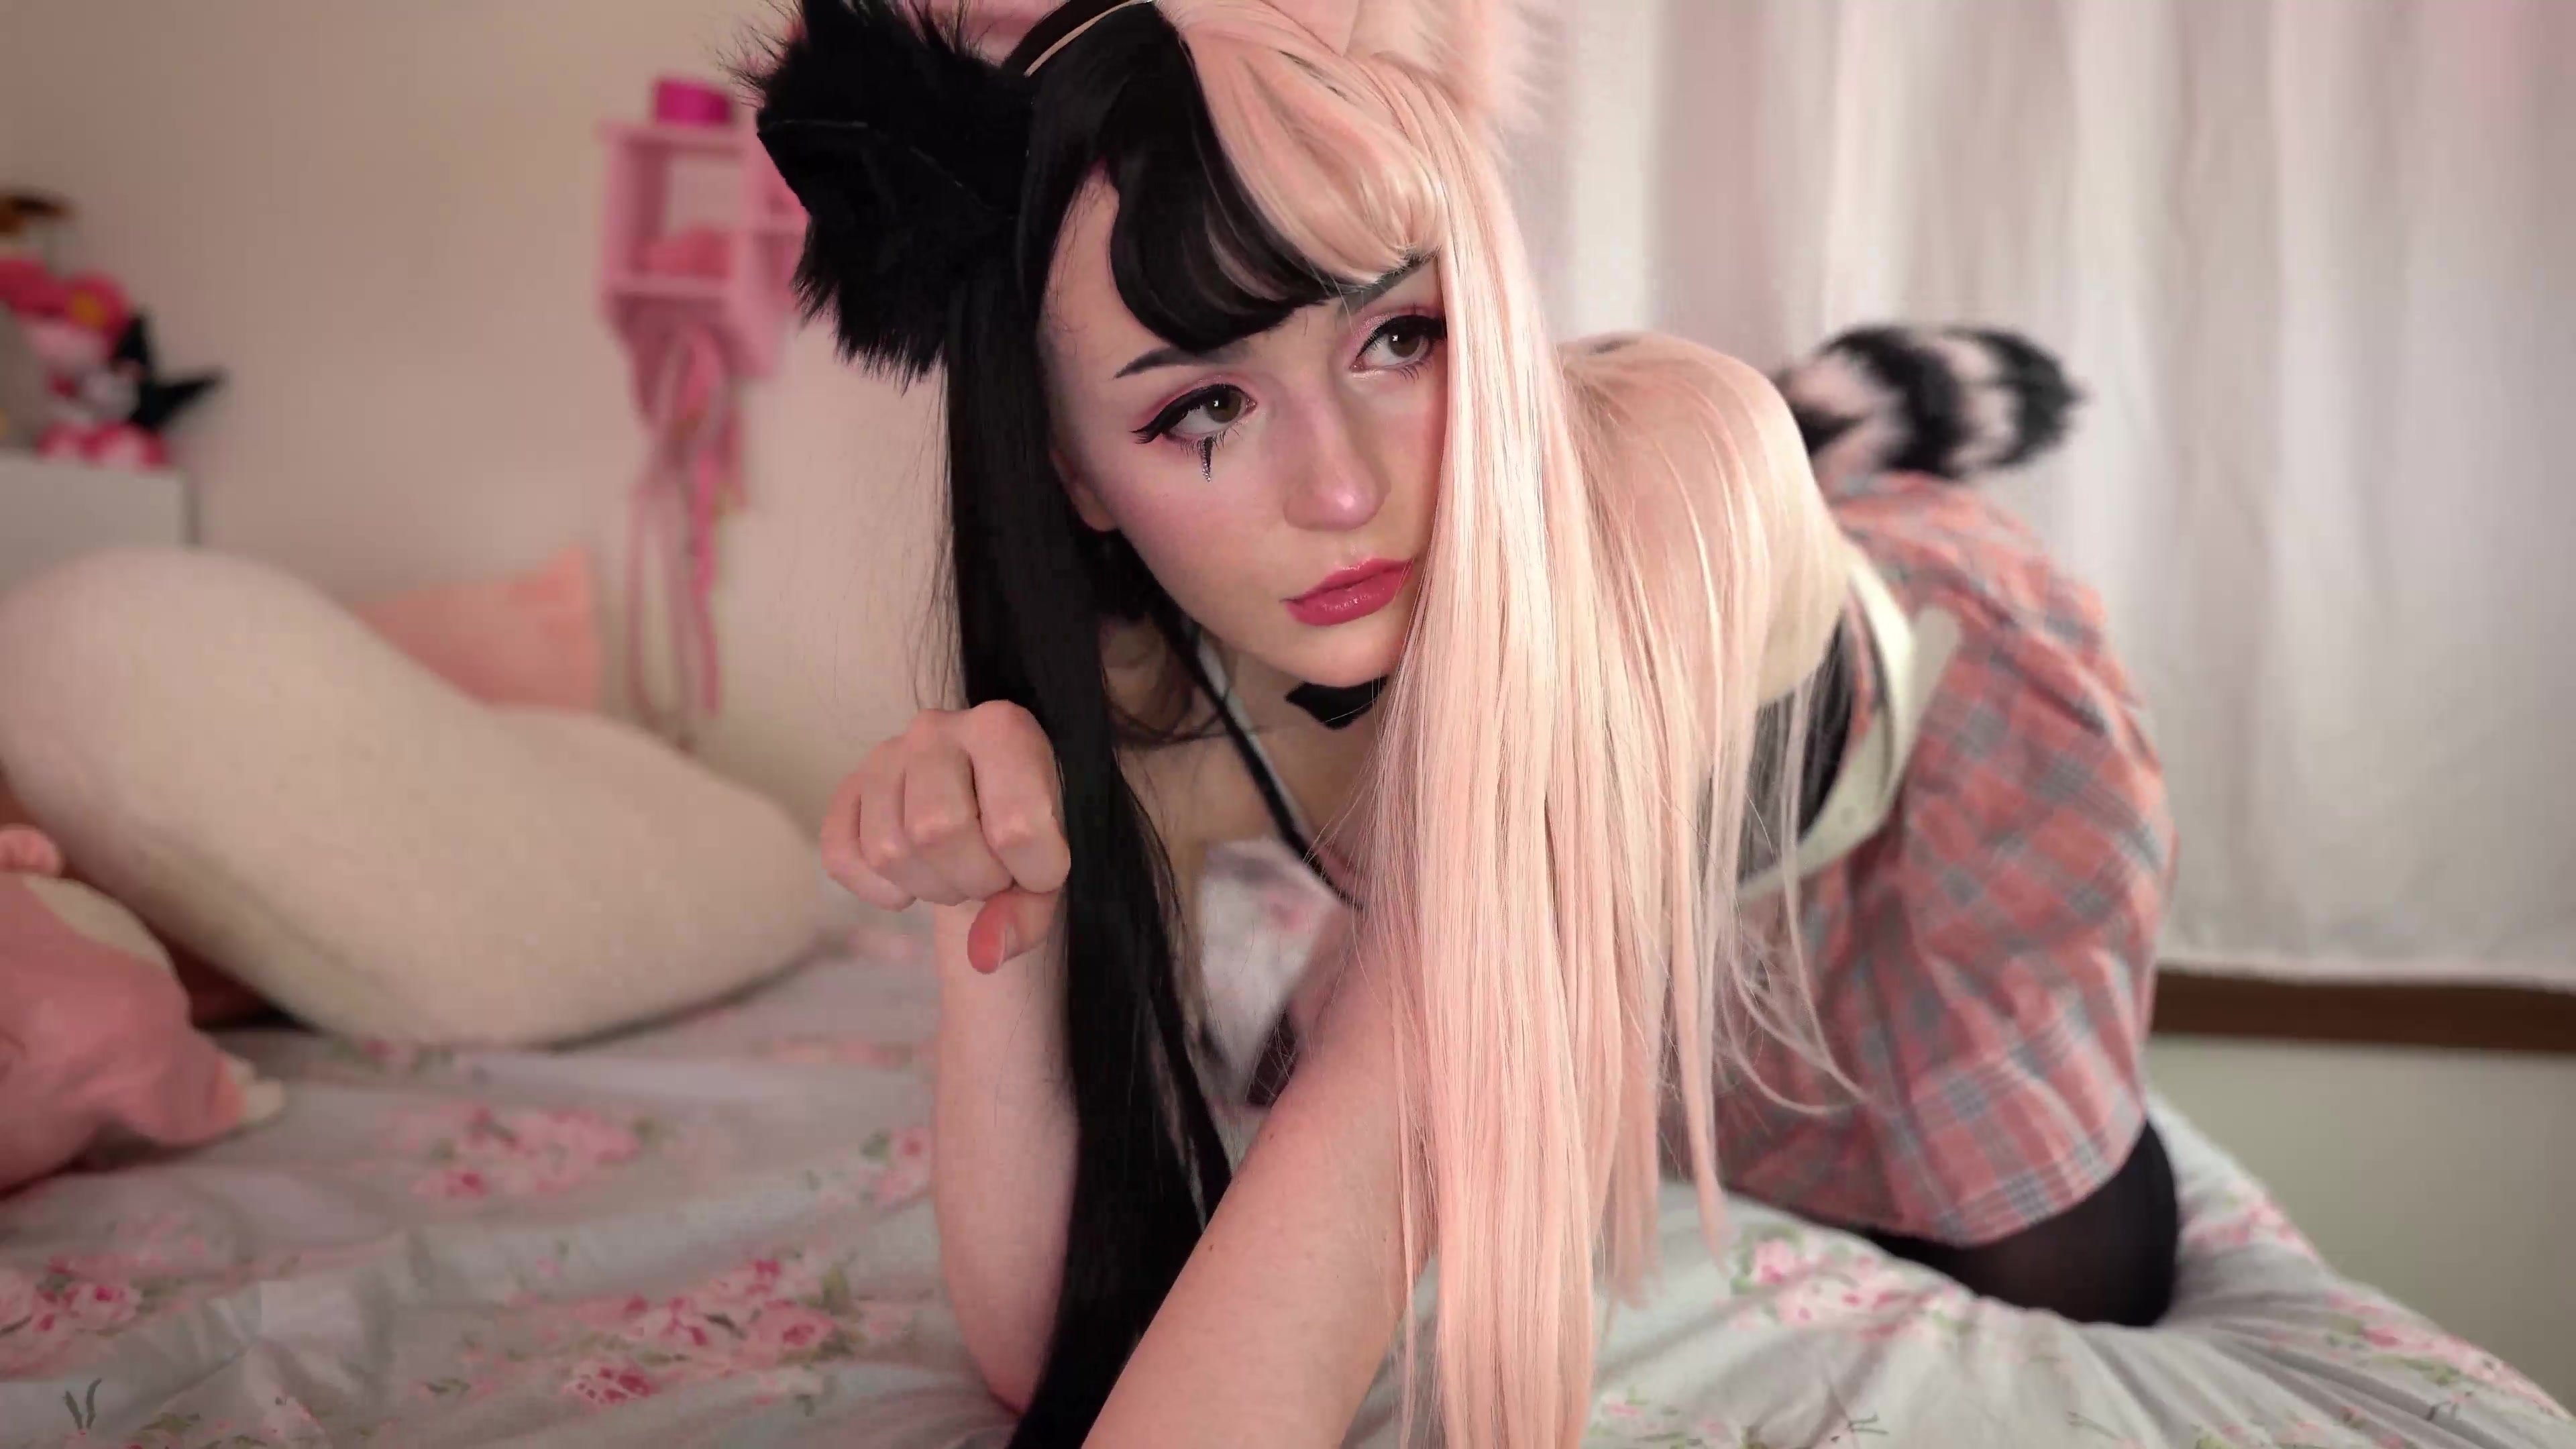 cat girl shows off